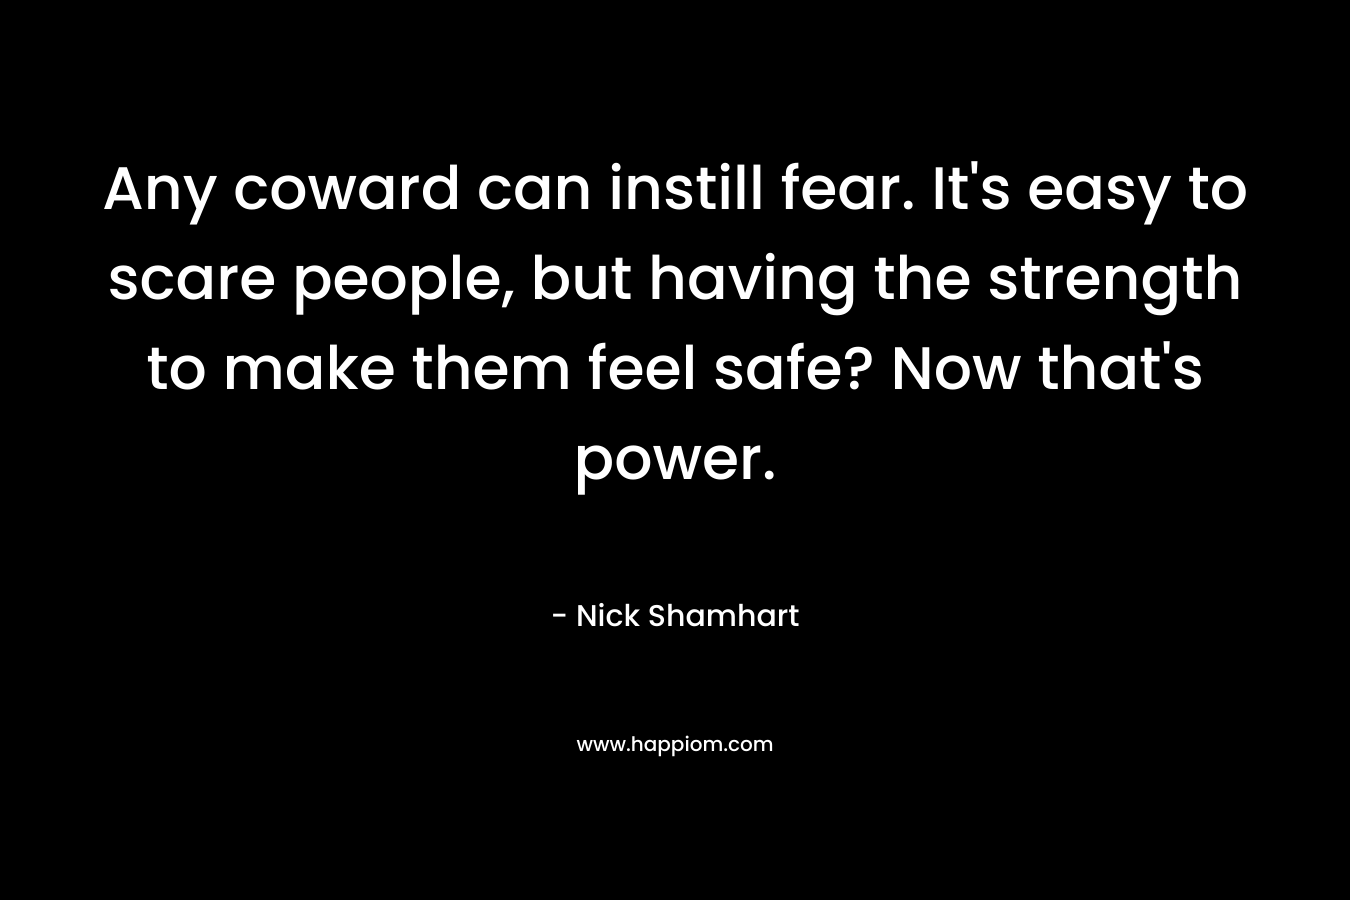 Any coward can instill fear. It's easy to scare people, but having the strength to make them feel safe? Now that's power.